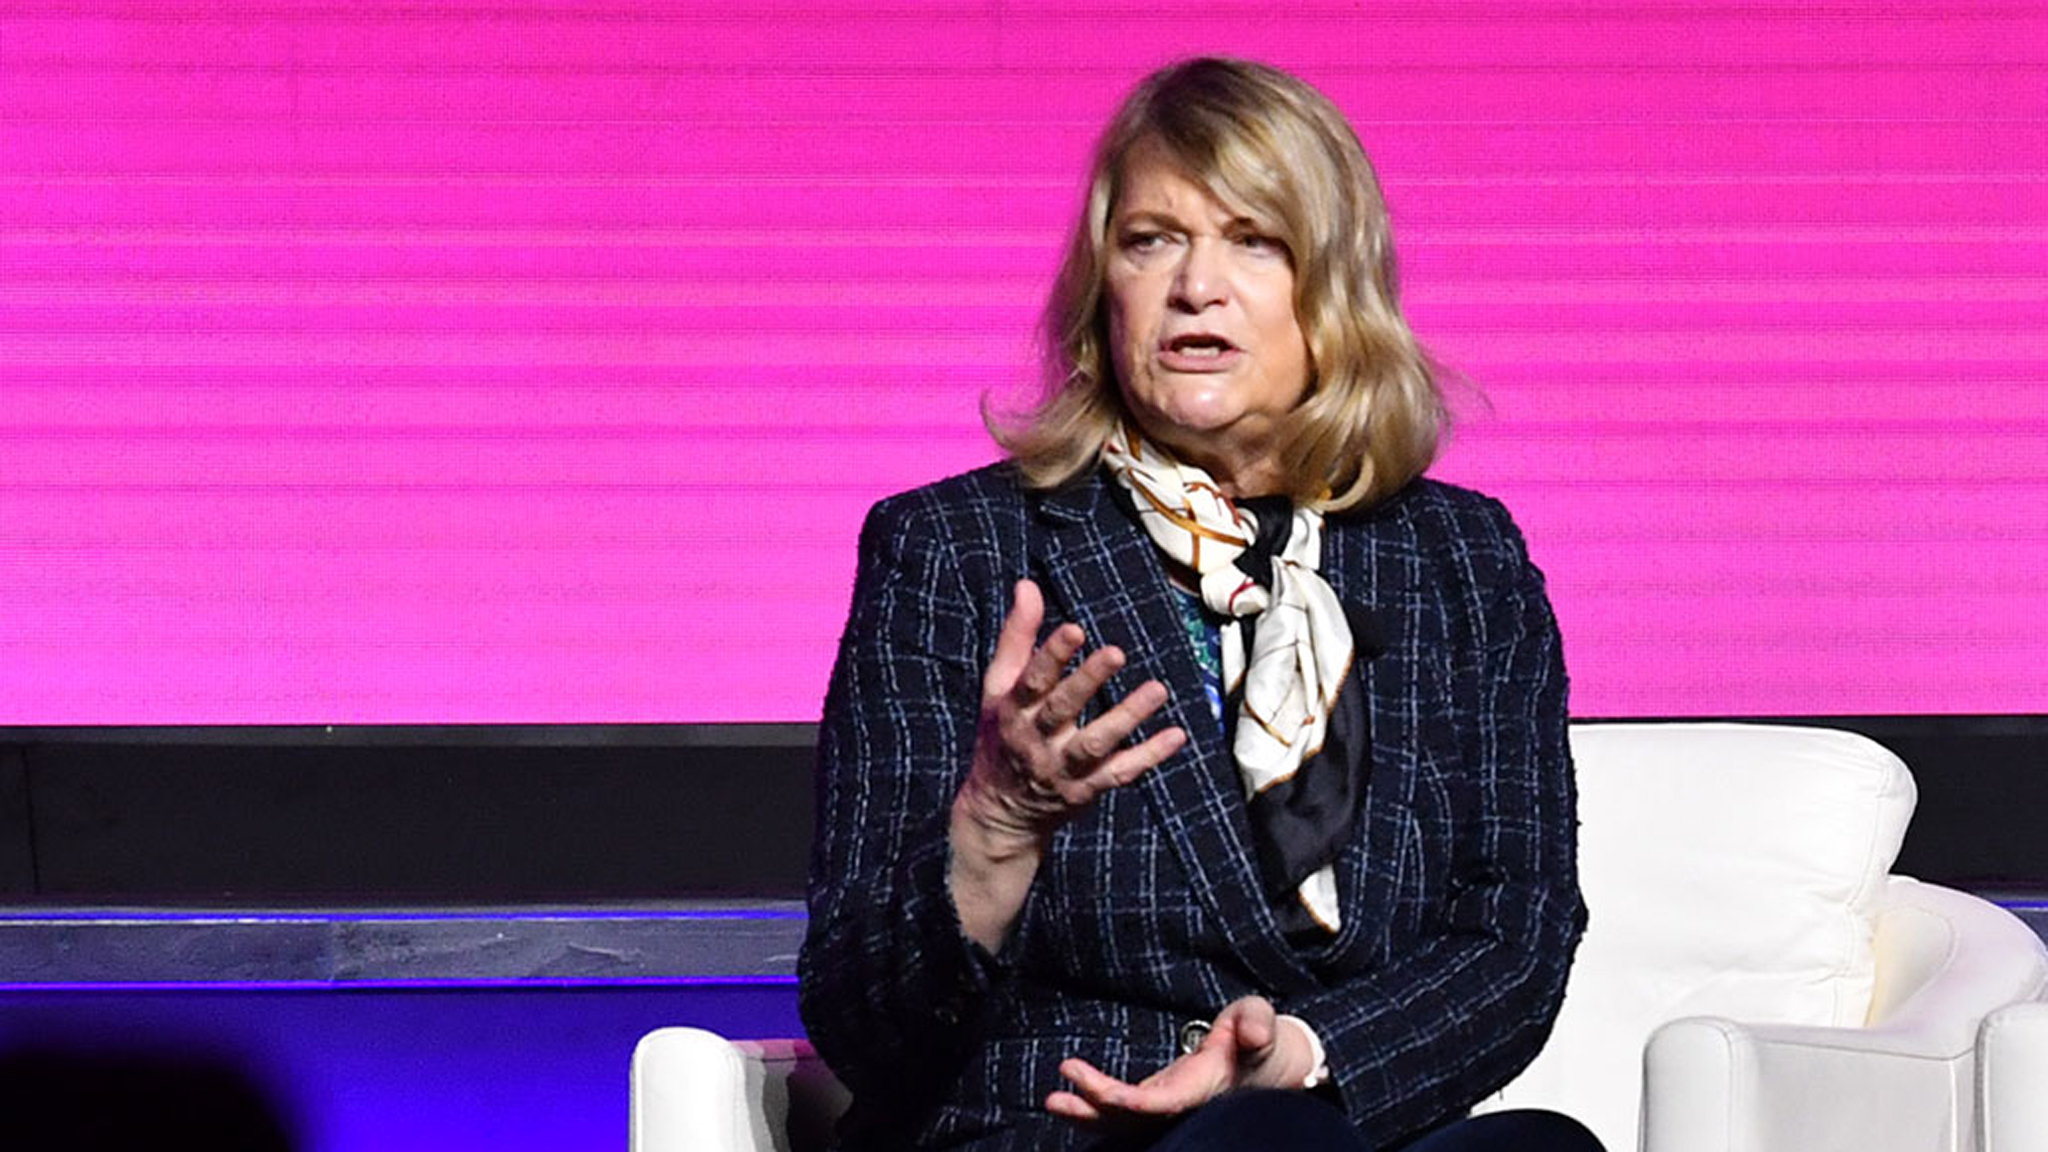 U.S. Senator Cynthia Lummis (R-Wyo.) is one of the lawmakers asking for more information after the SEC's X account was compromised on Tuesday. (Shutterstock/CoinDesk)